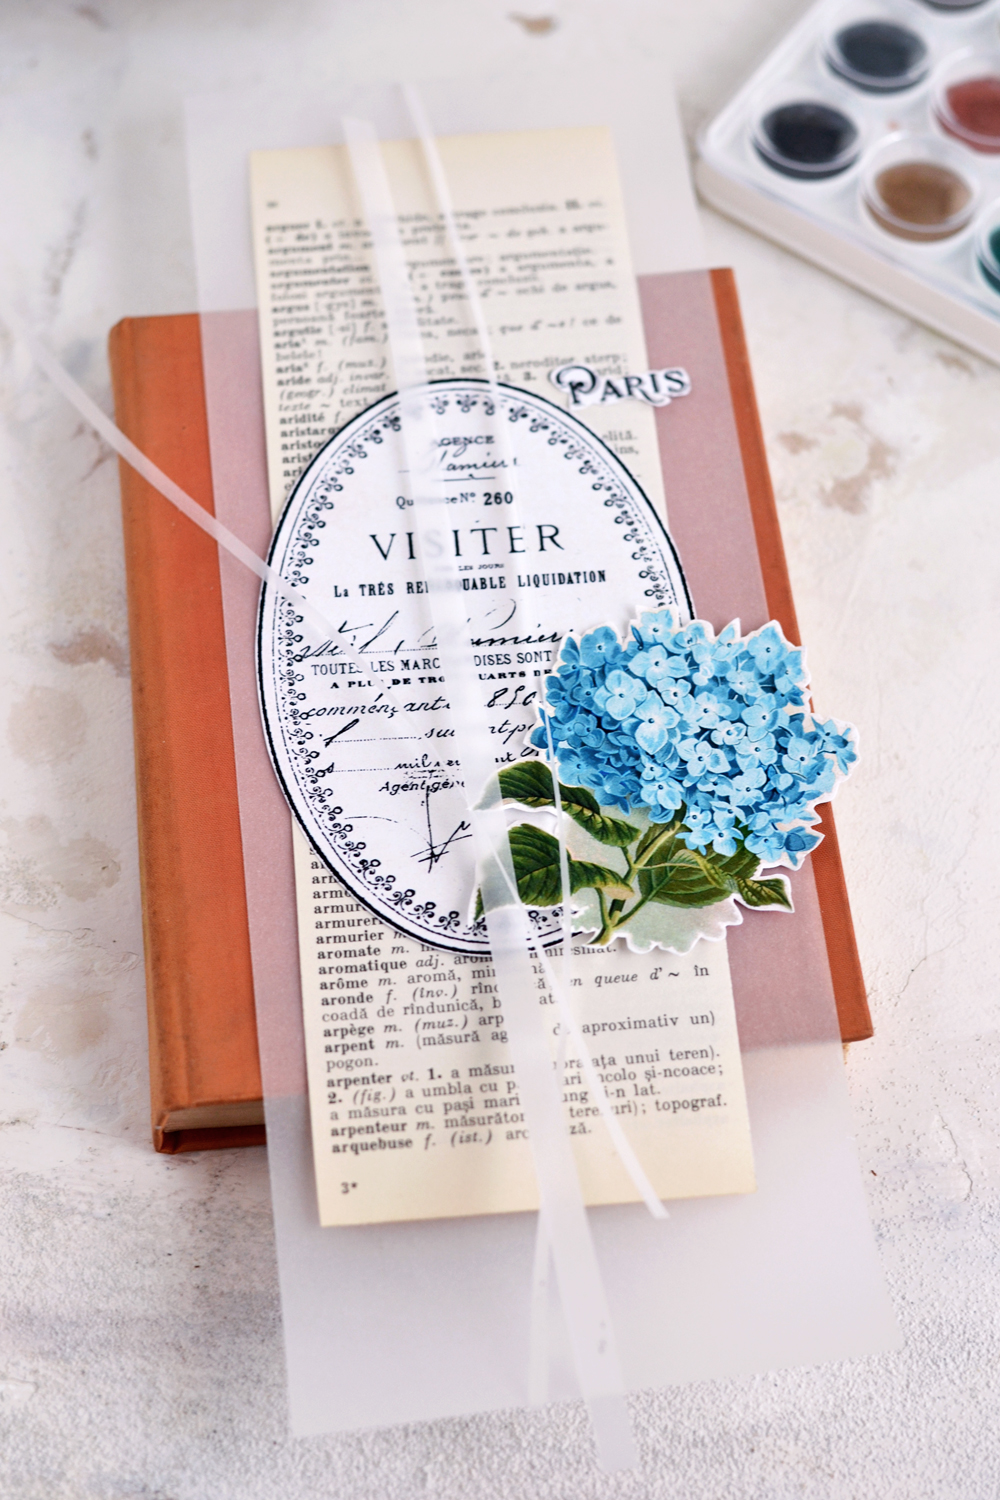 Hydrangeas with french labels book cover laying out on book